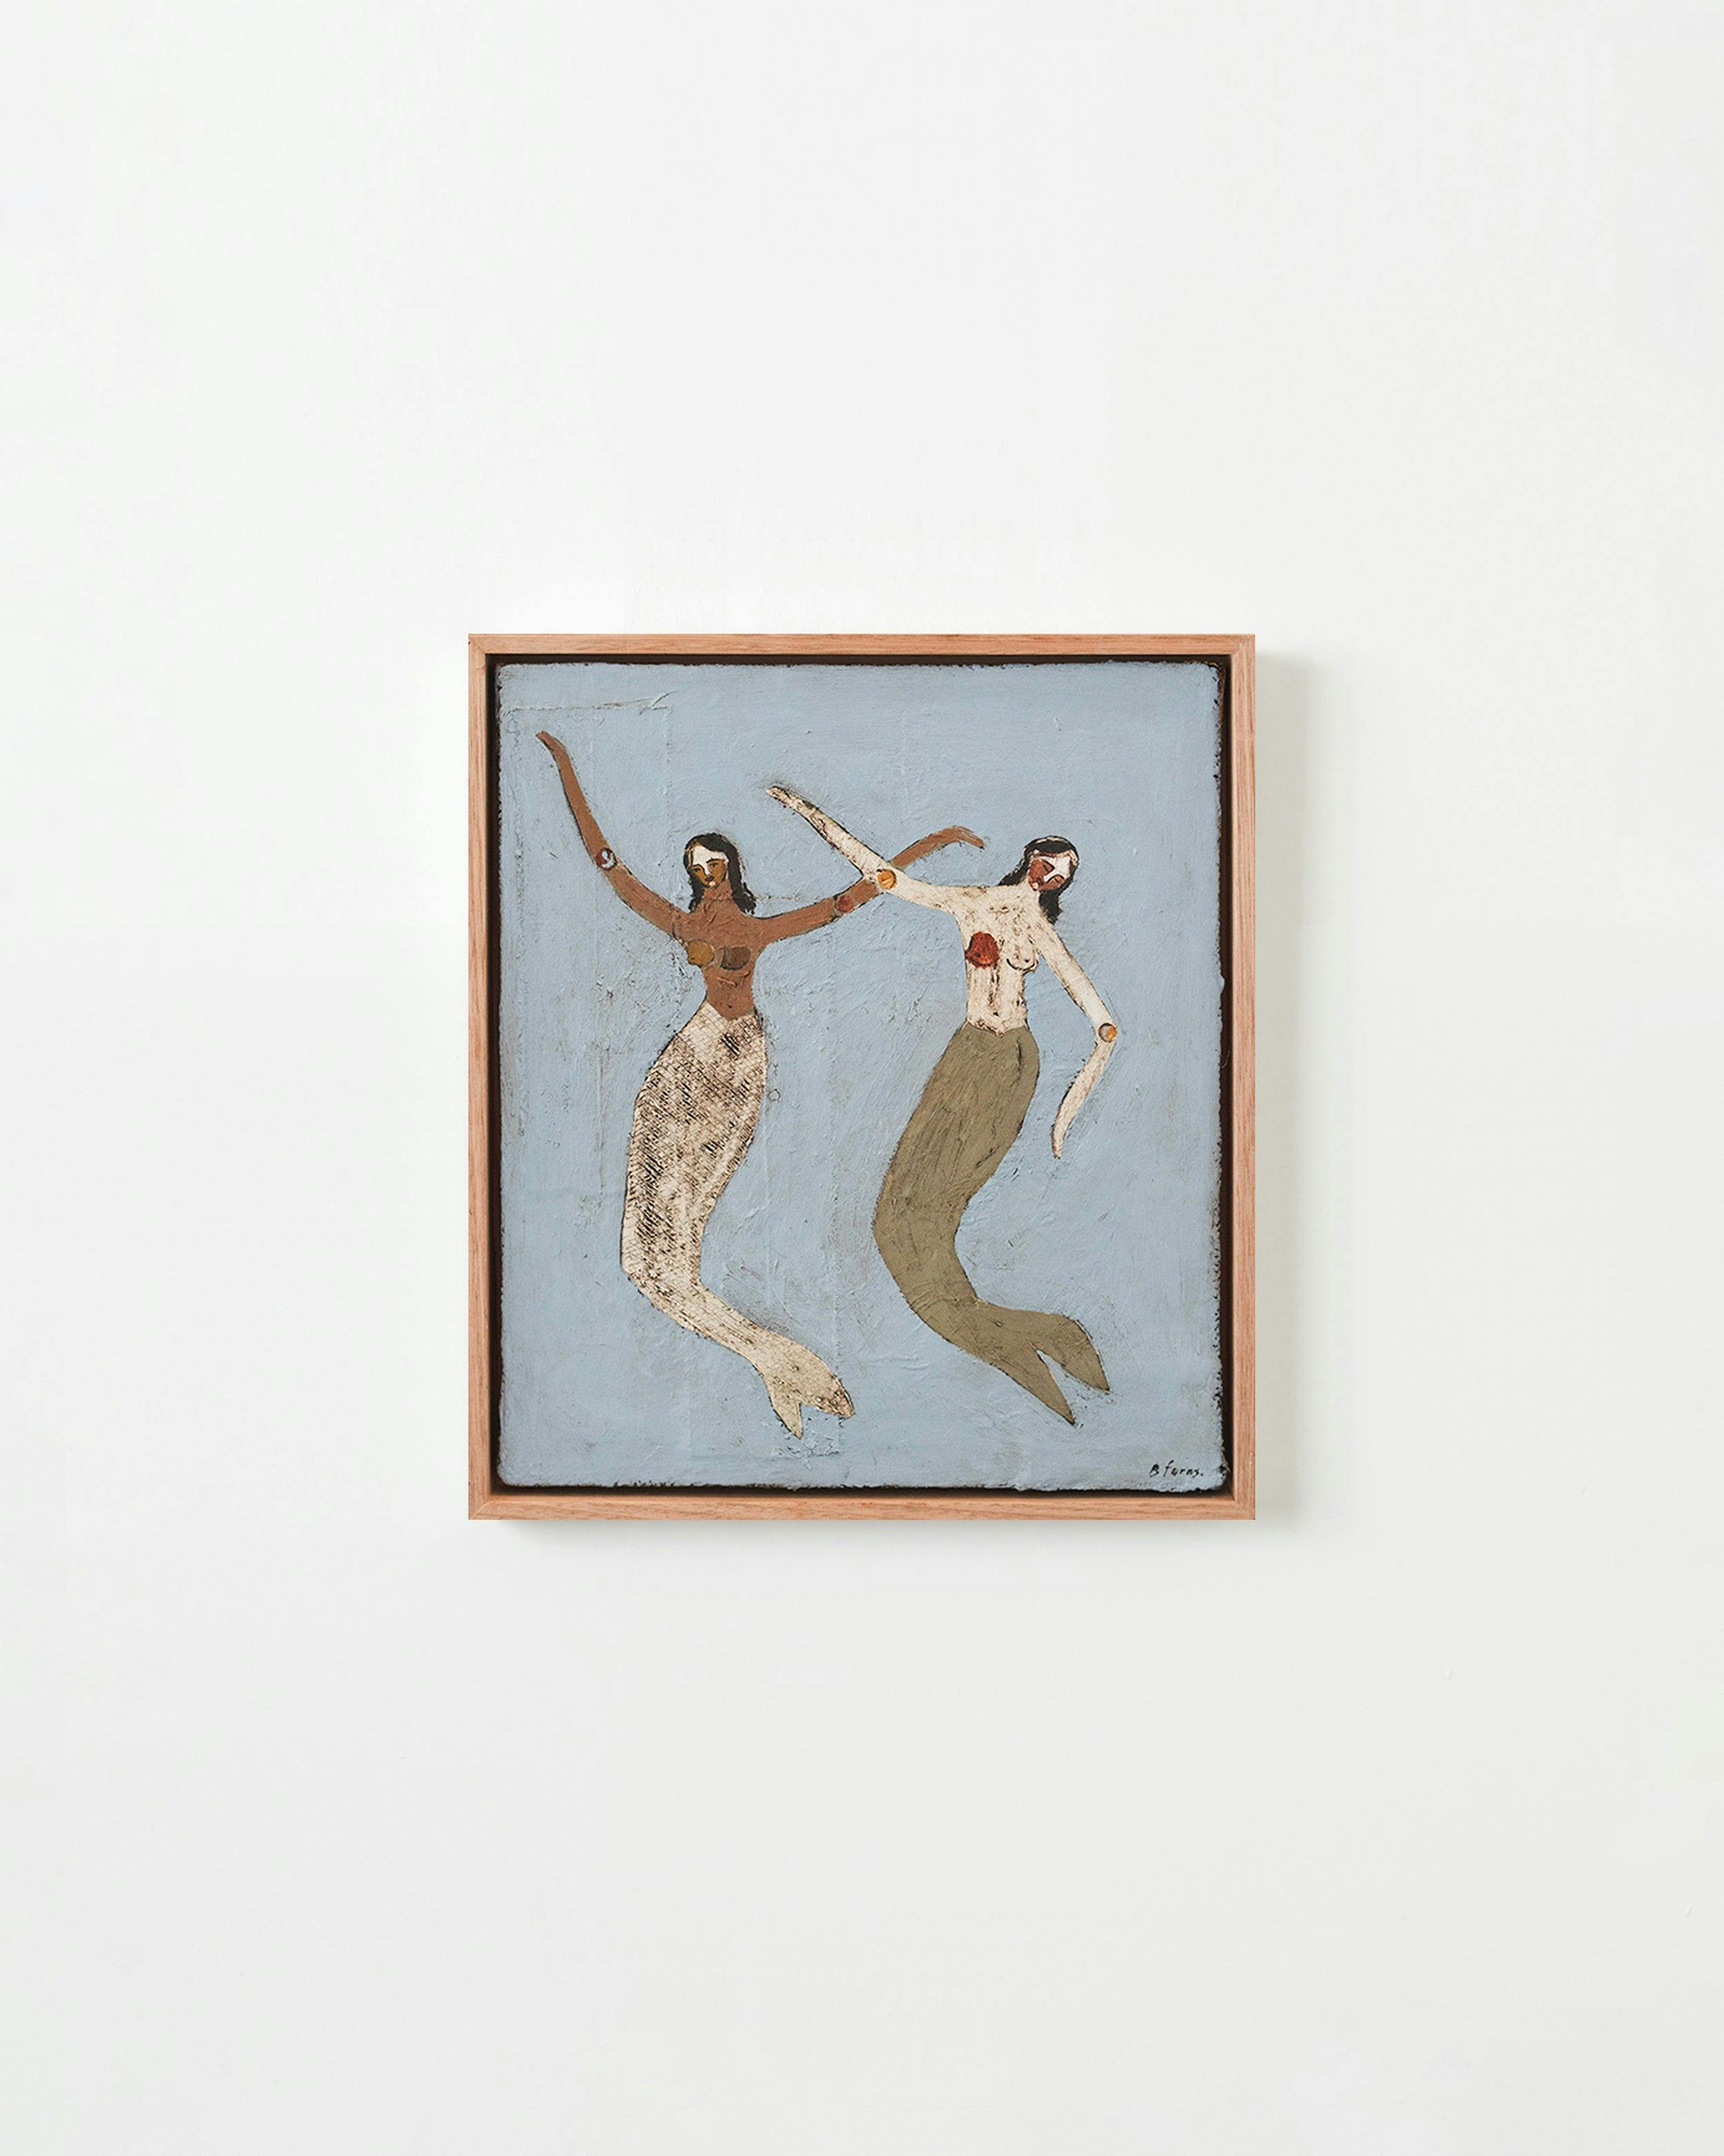 Painting by Brittany Ferns titled "Sirens Duet Two".